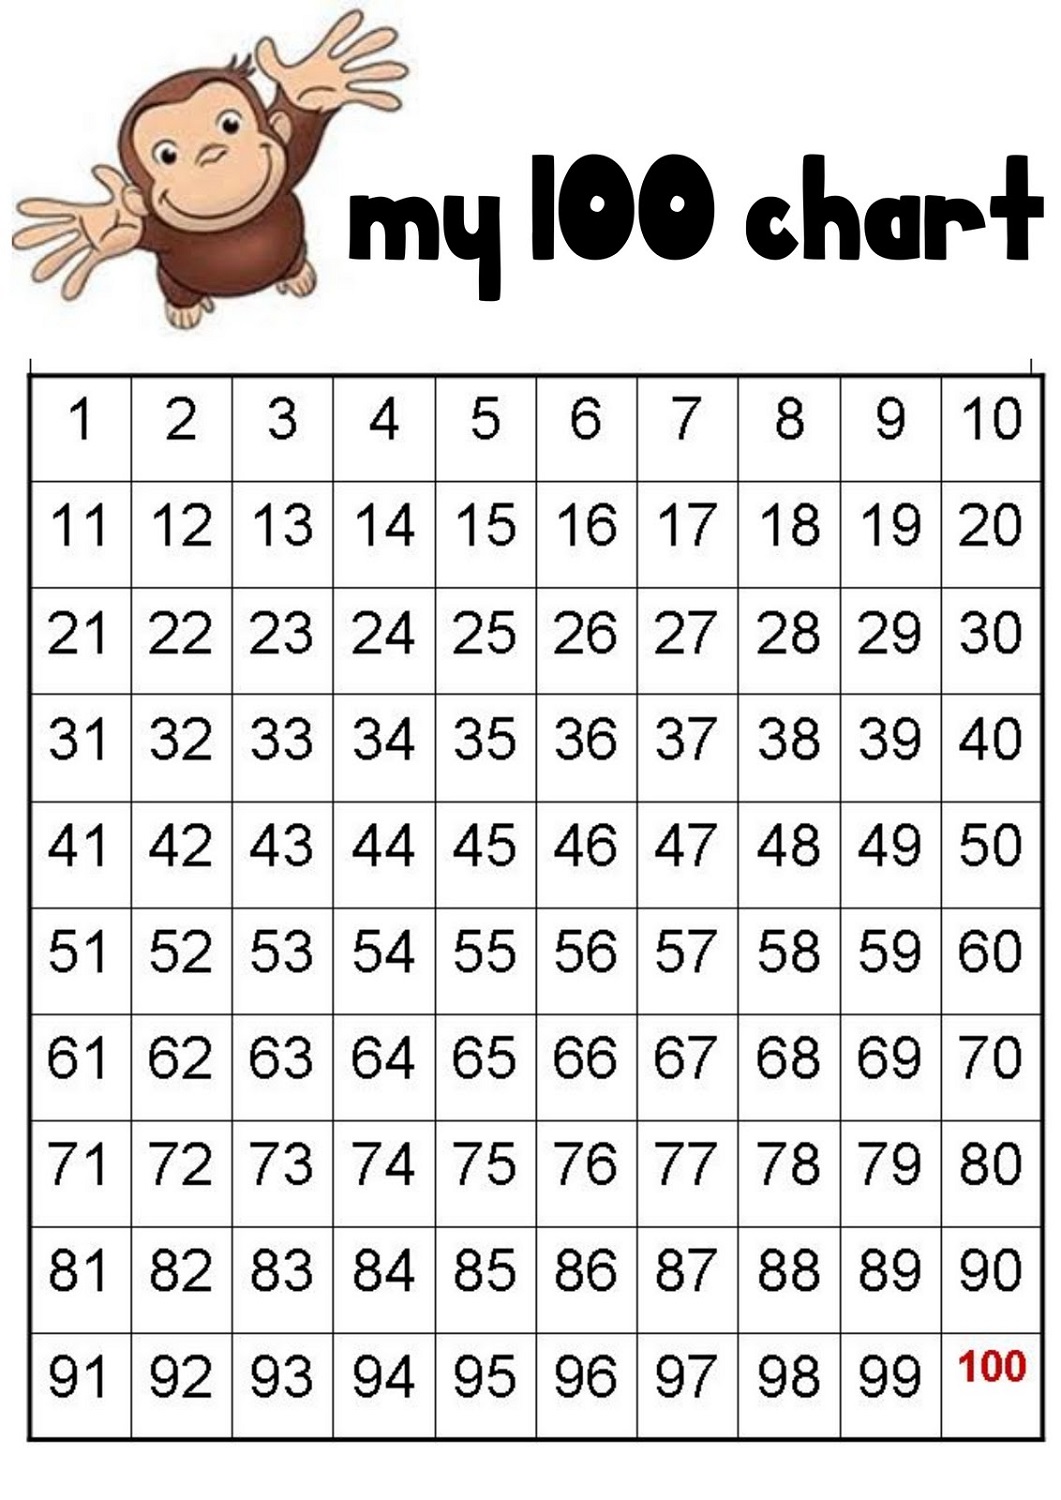 chart-of-numbers-1-100-monkey